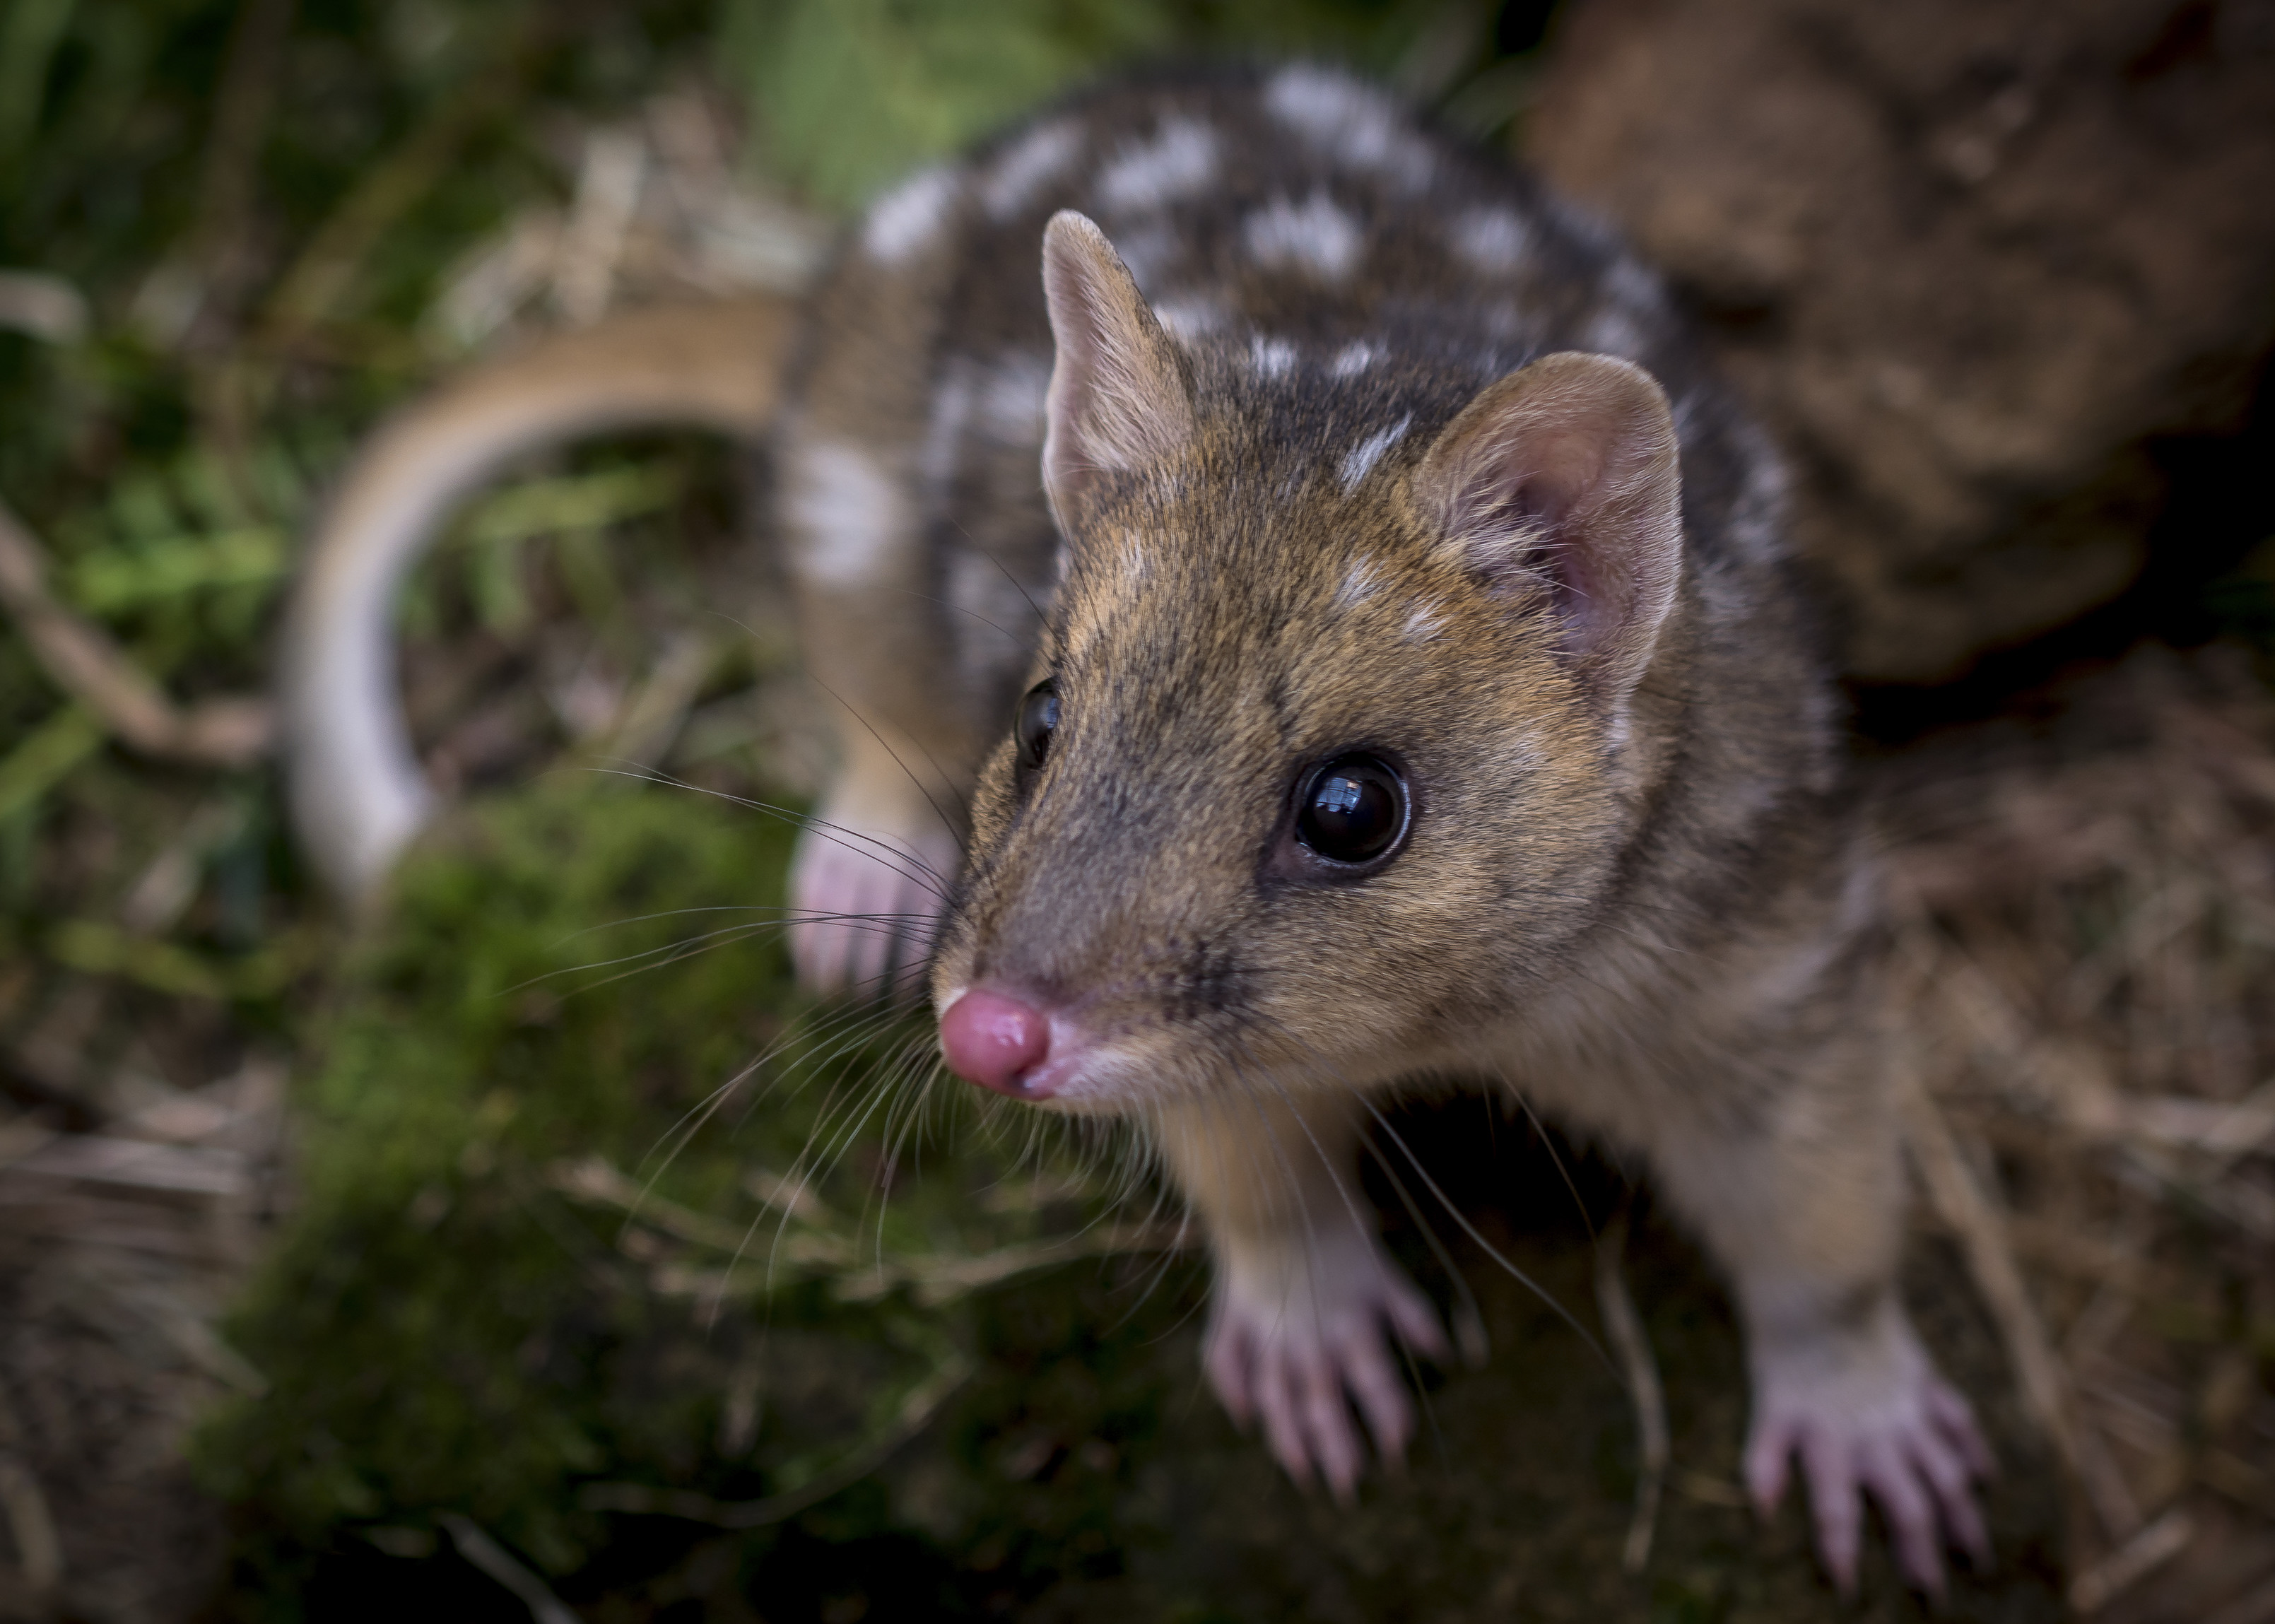 Adorable close up image of an Eastern Quoll, coming to say hello.